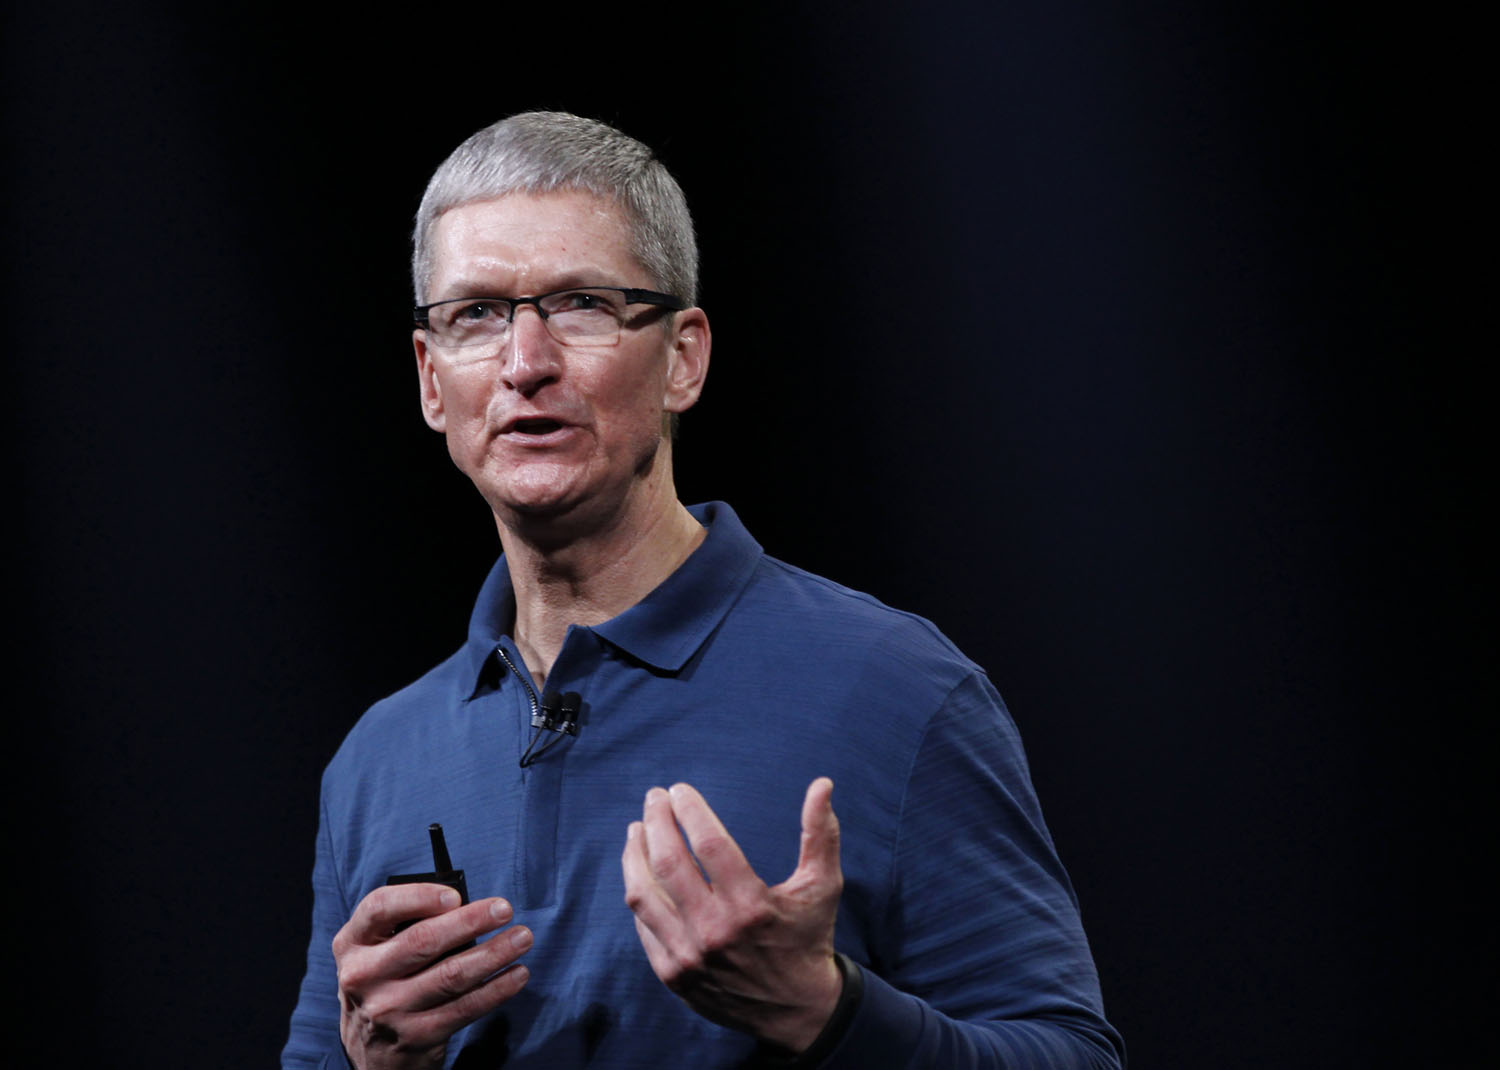 Apple CEO Tim Cook speaks to the audience during an Apple event in San Jose, Calif., on Oct. 23, 2012.